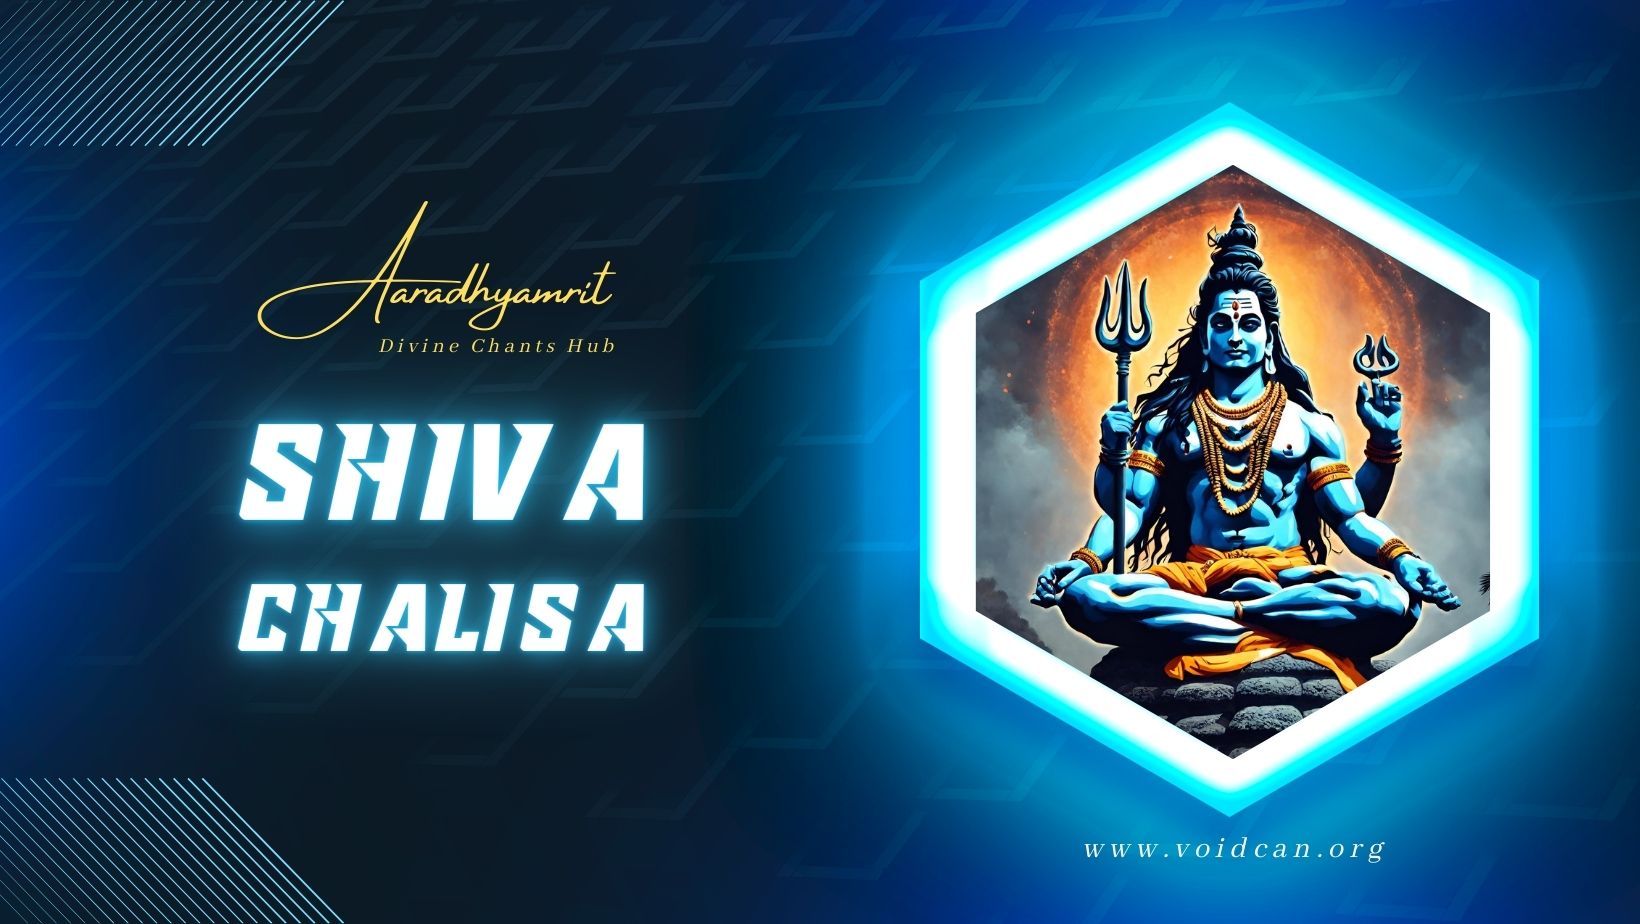 According to Hindu Mythology chanting of Shiva Chalisa regularly is the most powerful way to please God Shiva and get his blessing.